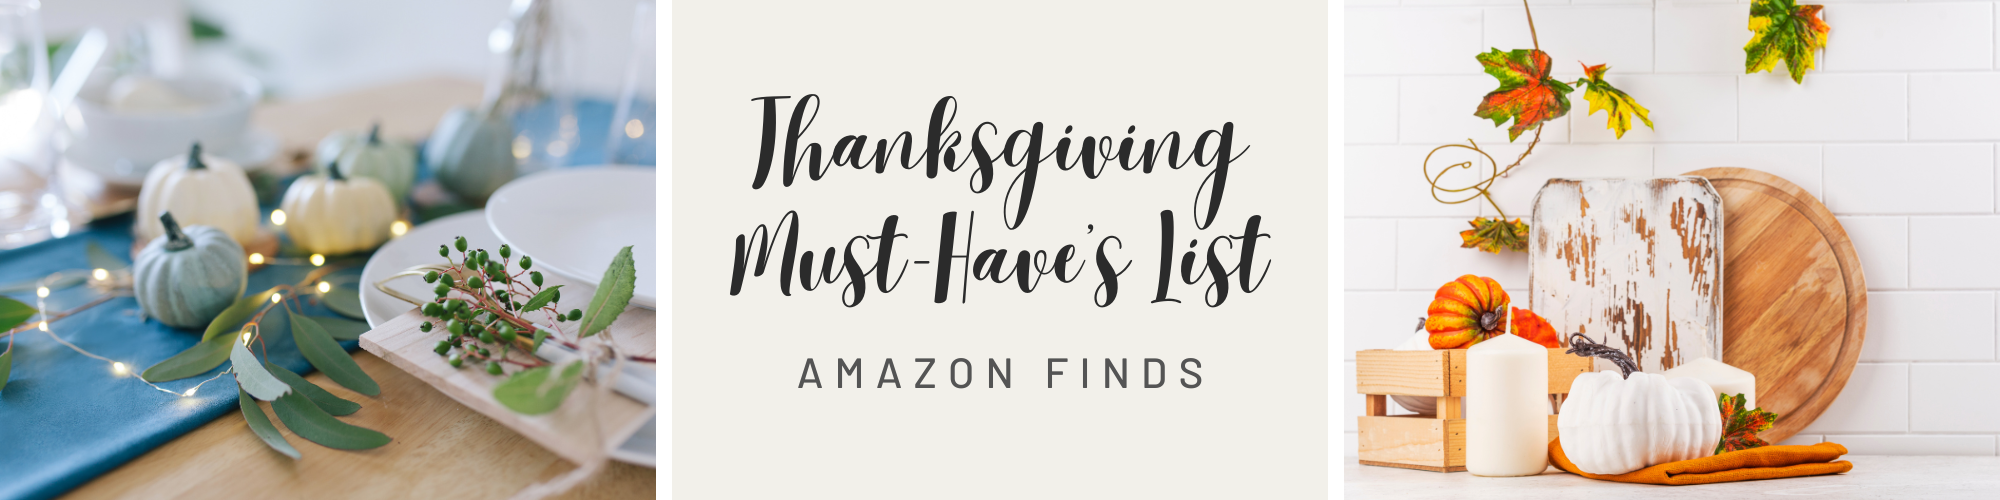 thanksgiving must haves list thanksgiving deals amazon finds all my favorite things updated list shop shop local discounts cyber monday